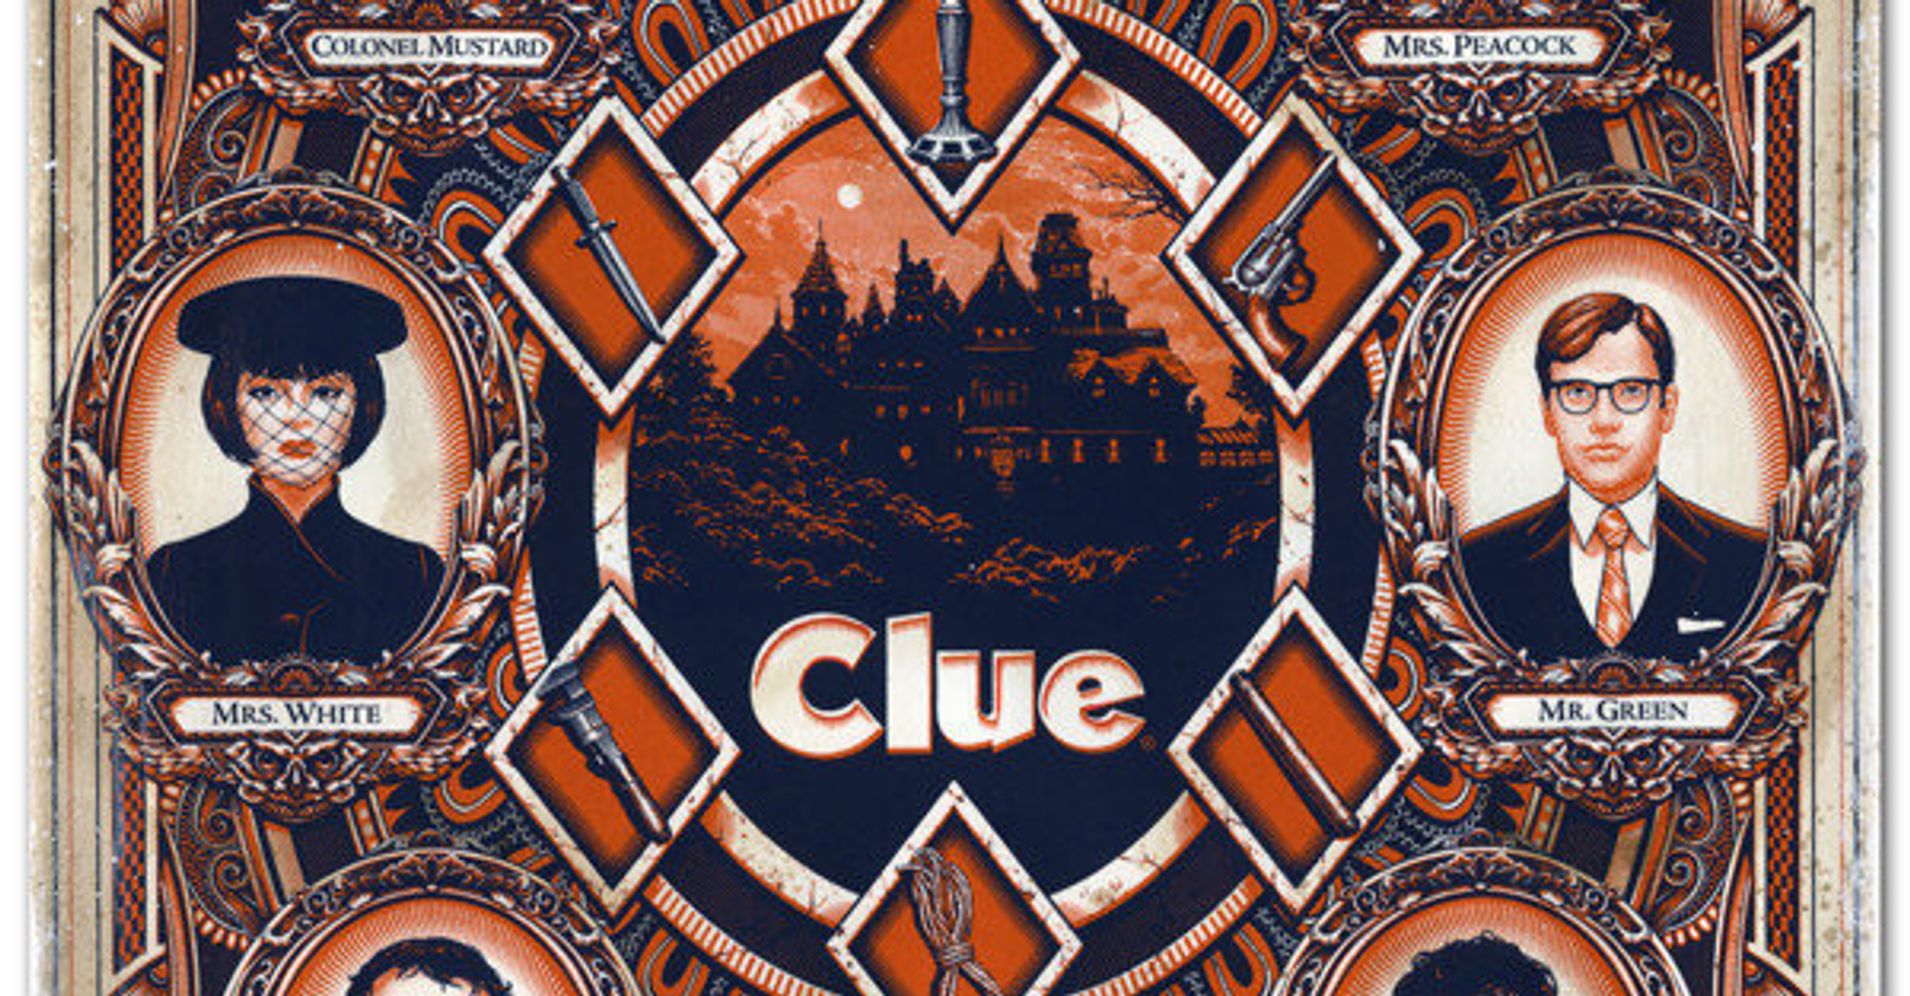 30 Years Later And Clue The Movie Is Still A Work Of Cult Genius